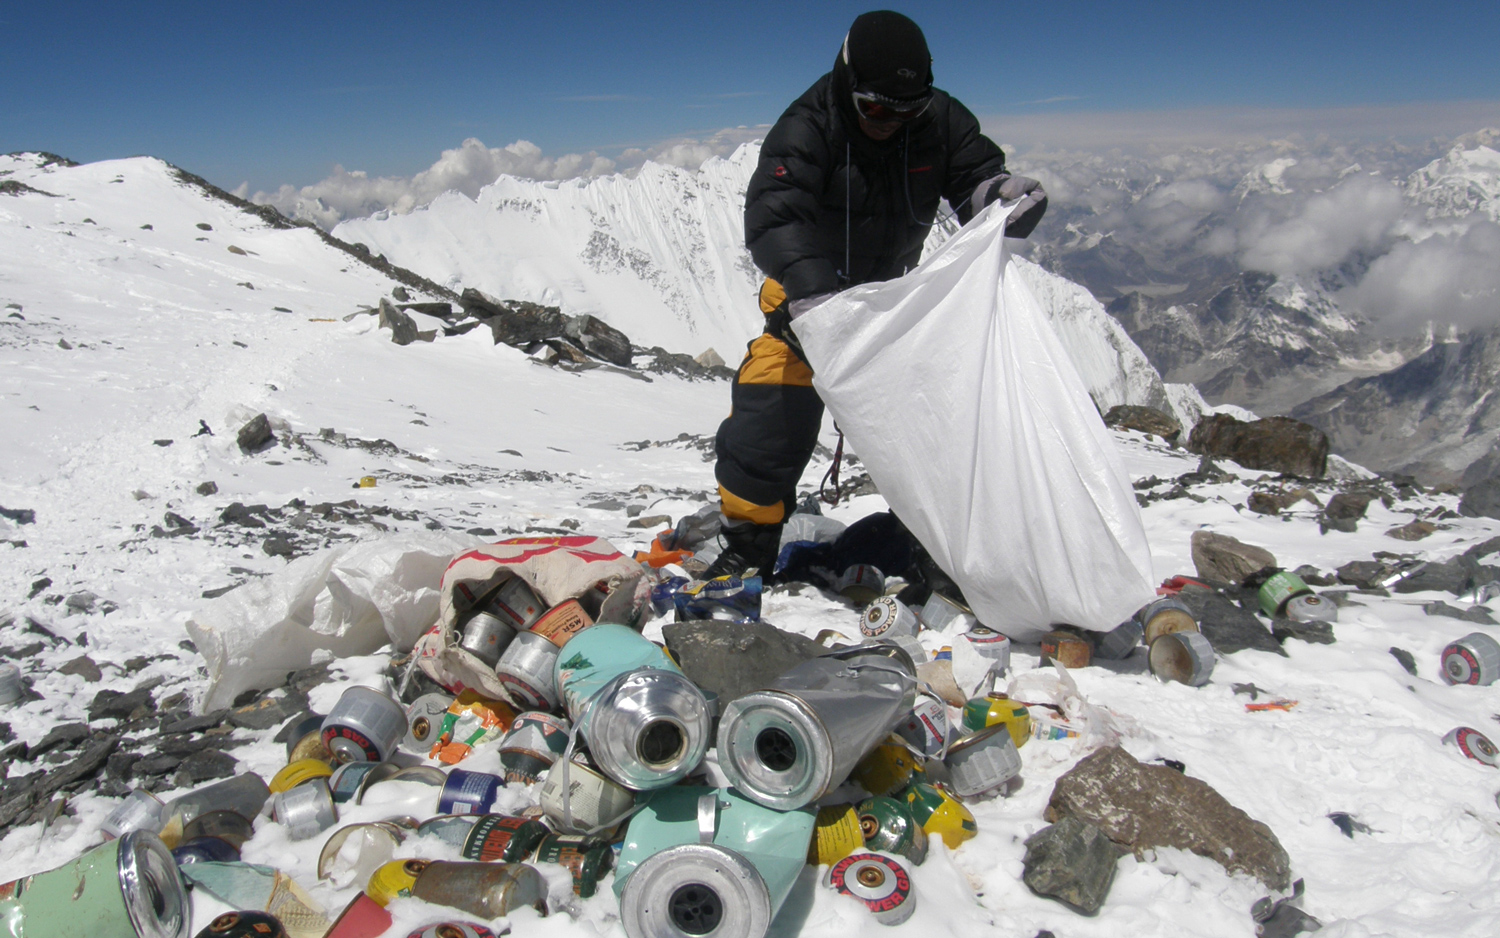 a Nepalese sherpa remocing trash from mount everest